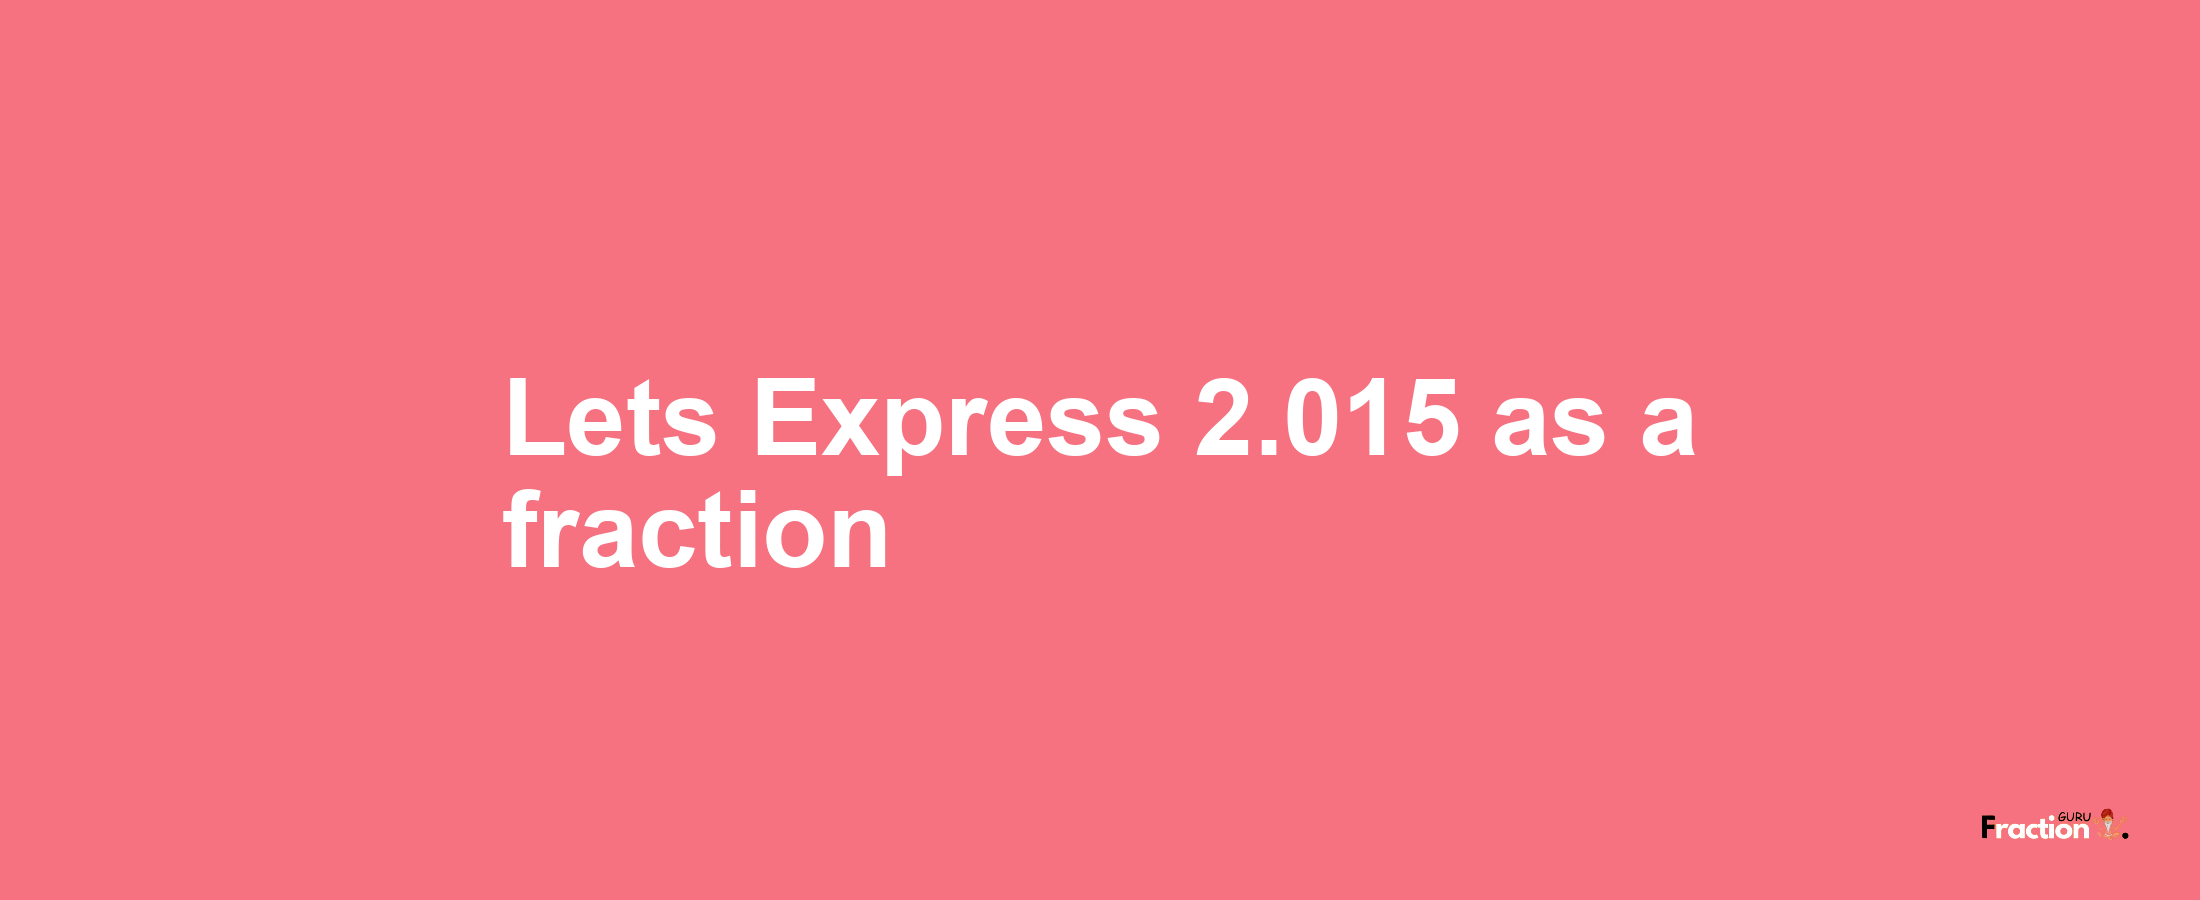 Lets Express 2.015 as afraction